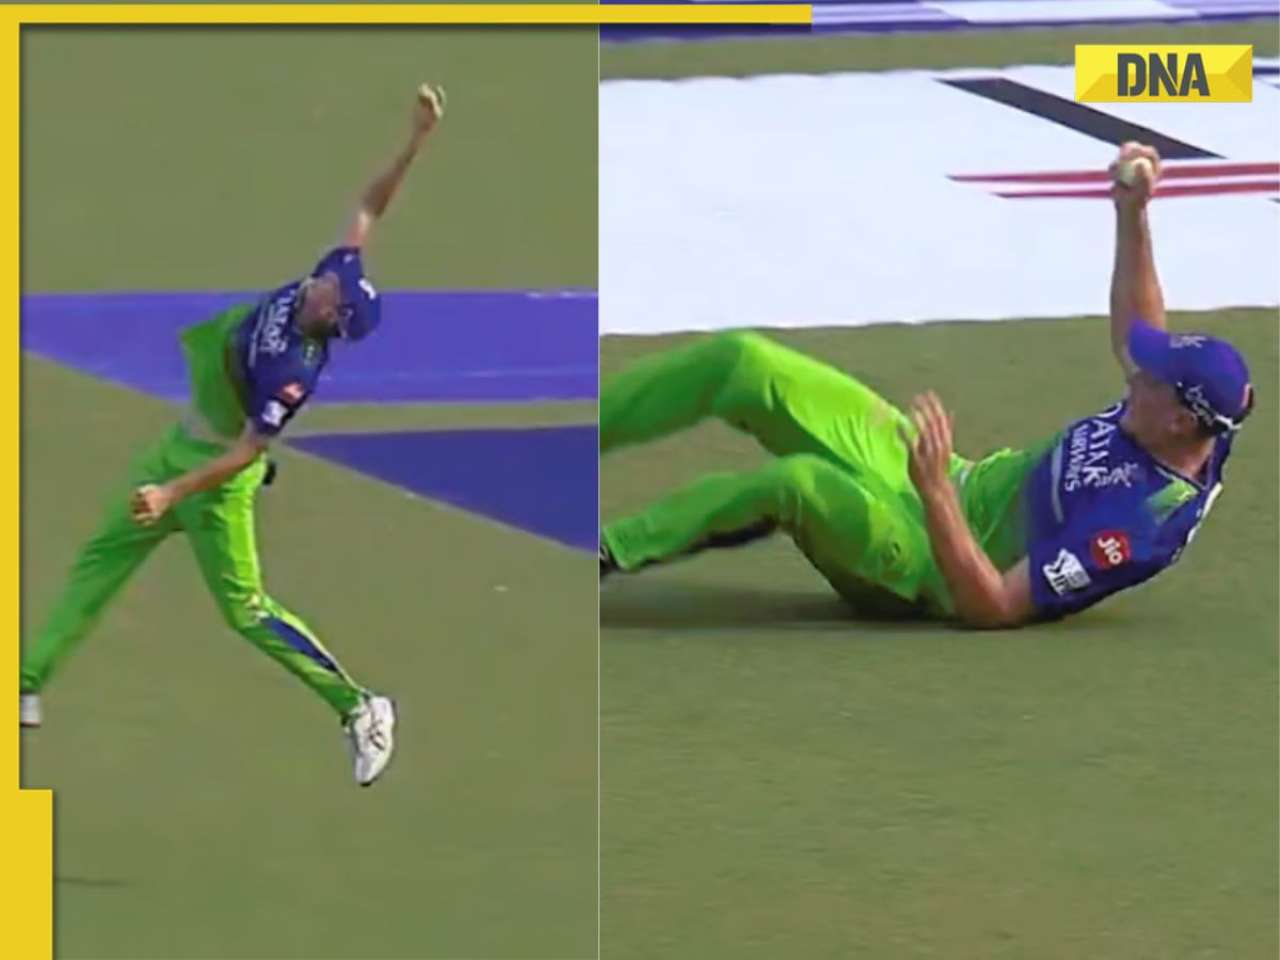 Watch: Cameron Green takes stunning one-handed catch to dismiss Angkrish Raghuvanshi during KKR vs RCB match